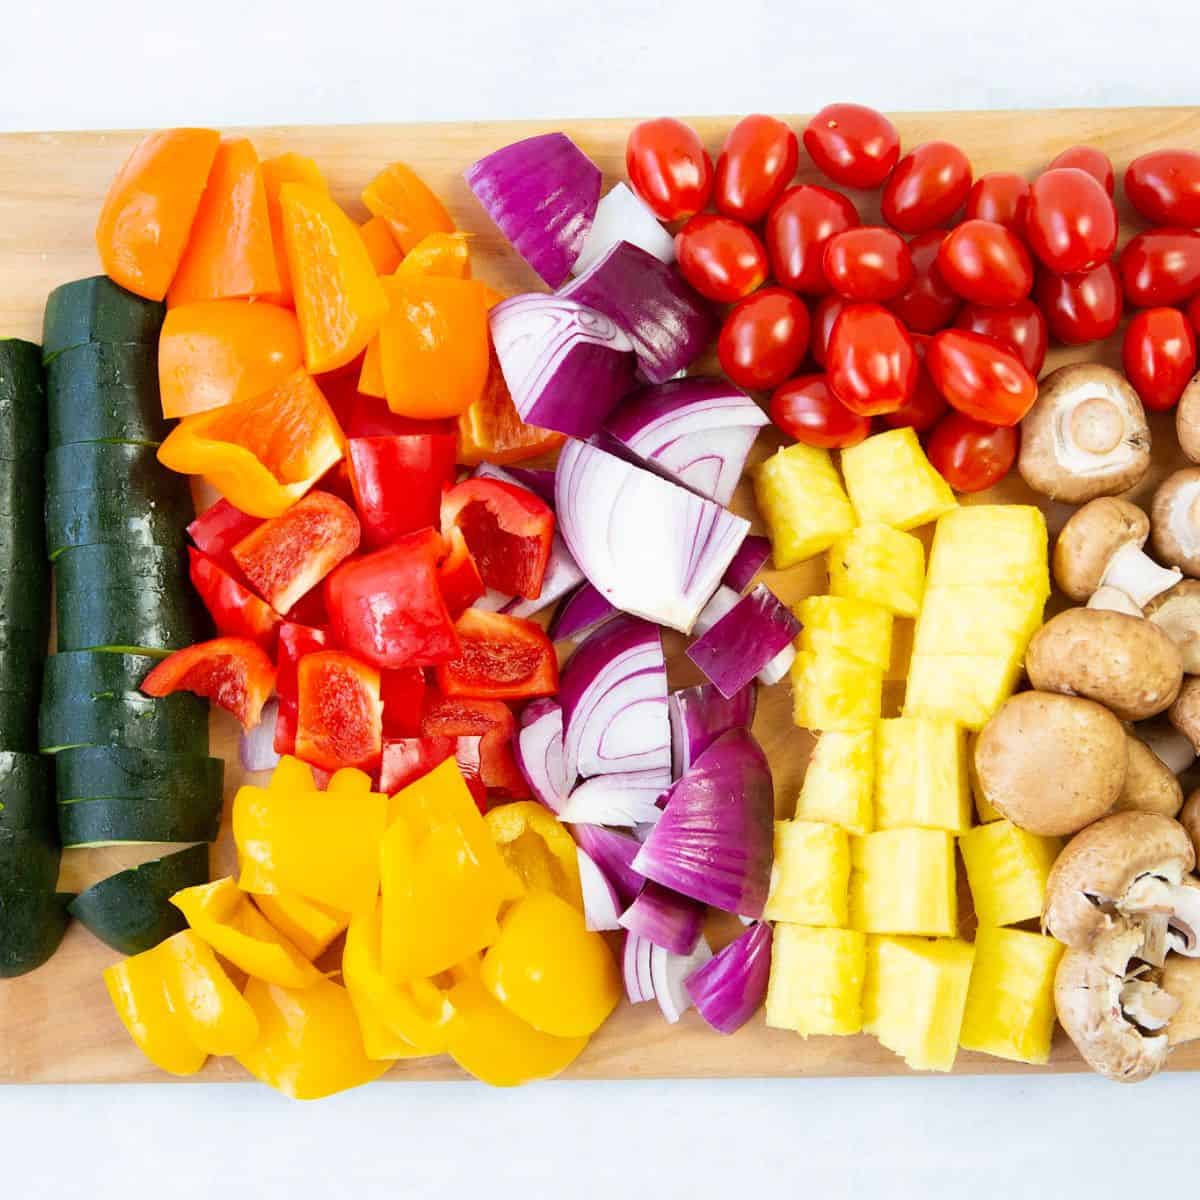 Tips to Cut and Peel Vegetables: This is the right way to chop